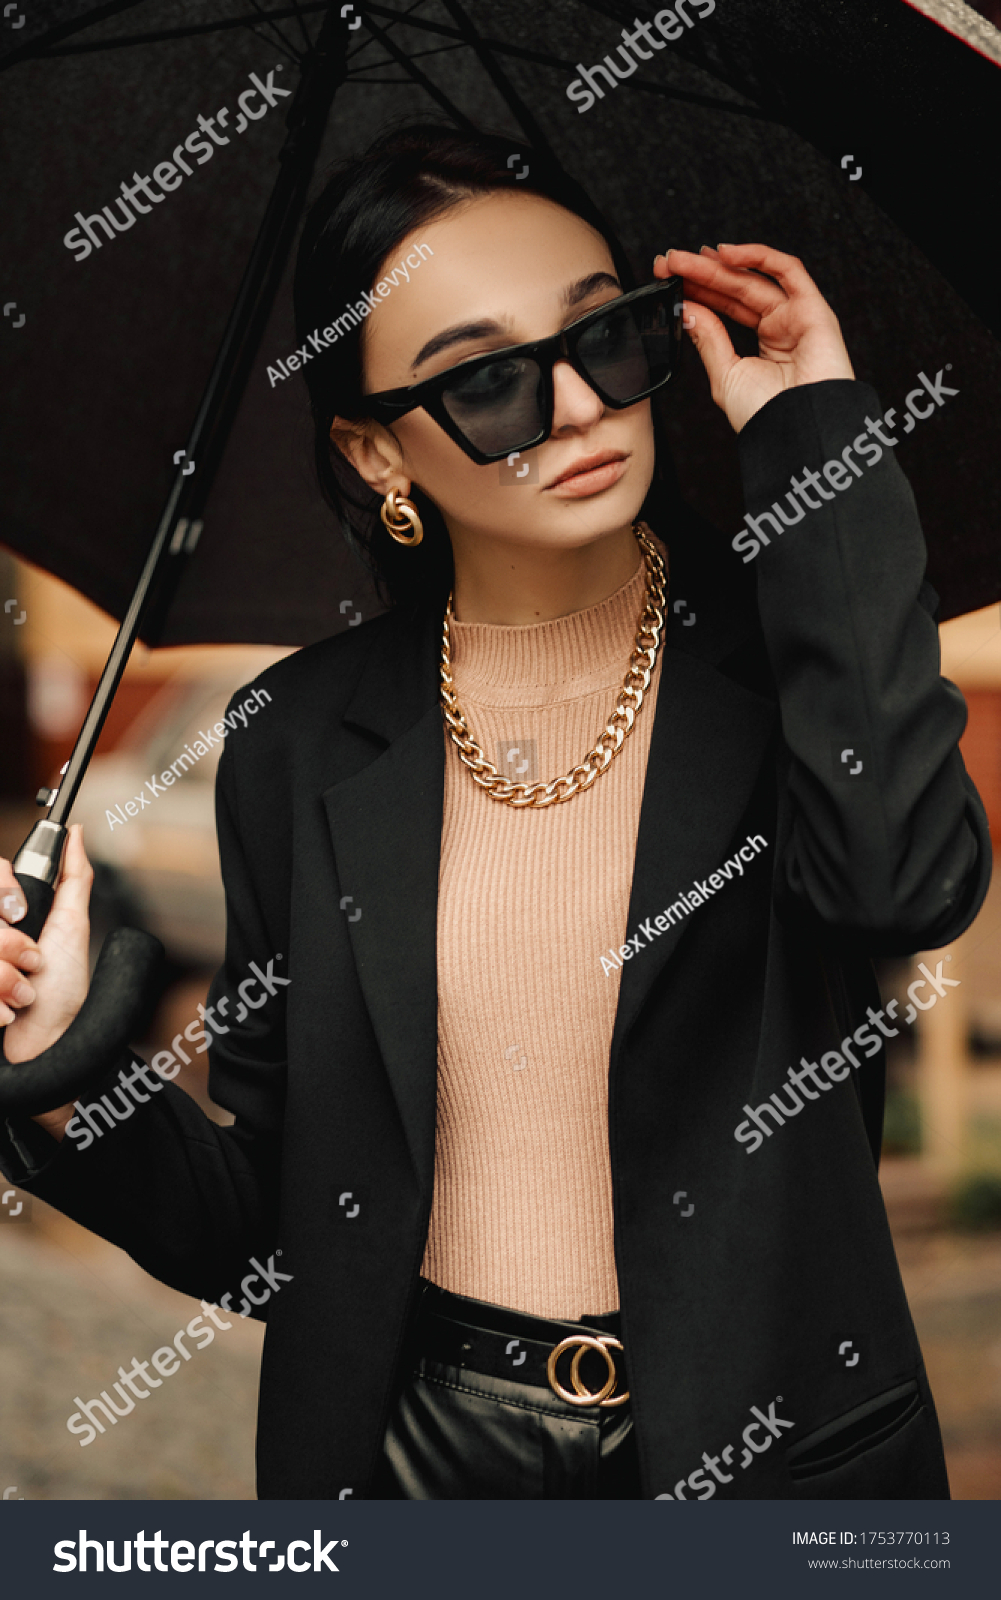 Young girl makes emotion.Dressed in a black shirt, black sweater, black hat, glasses and bright lips, fashion clothes.Wear vintage sunglasses, outfit and hat, leisure style, bright colors.Sensual woma